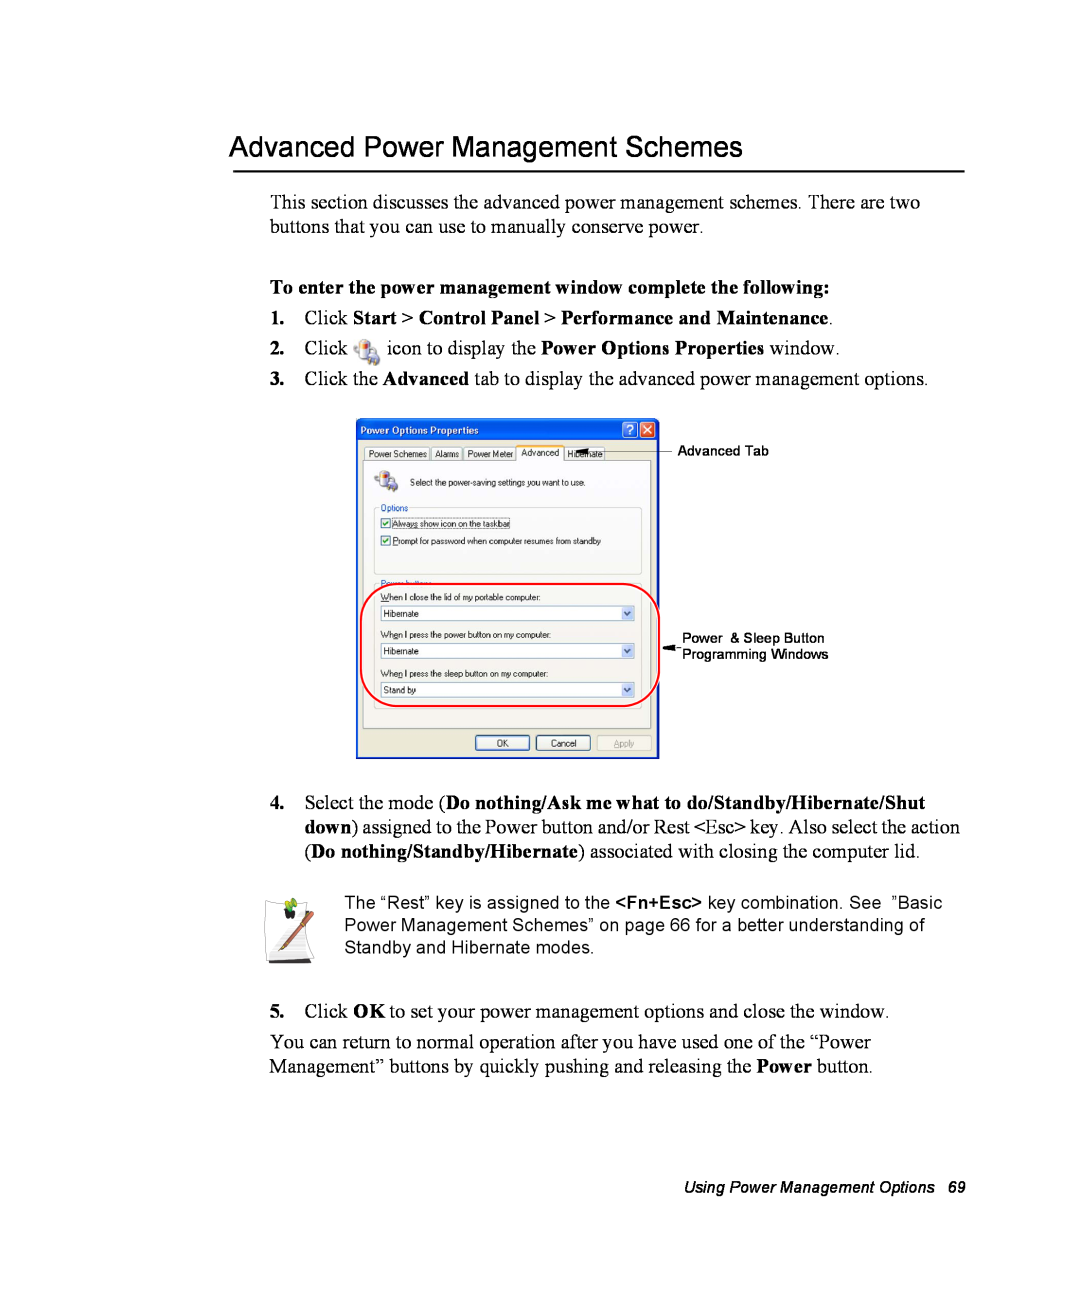 Samsung NX10PRTV06/SEF Advanced Power Management Schemes, To enter the power management window complete the following 